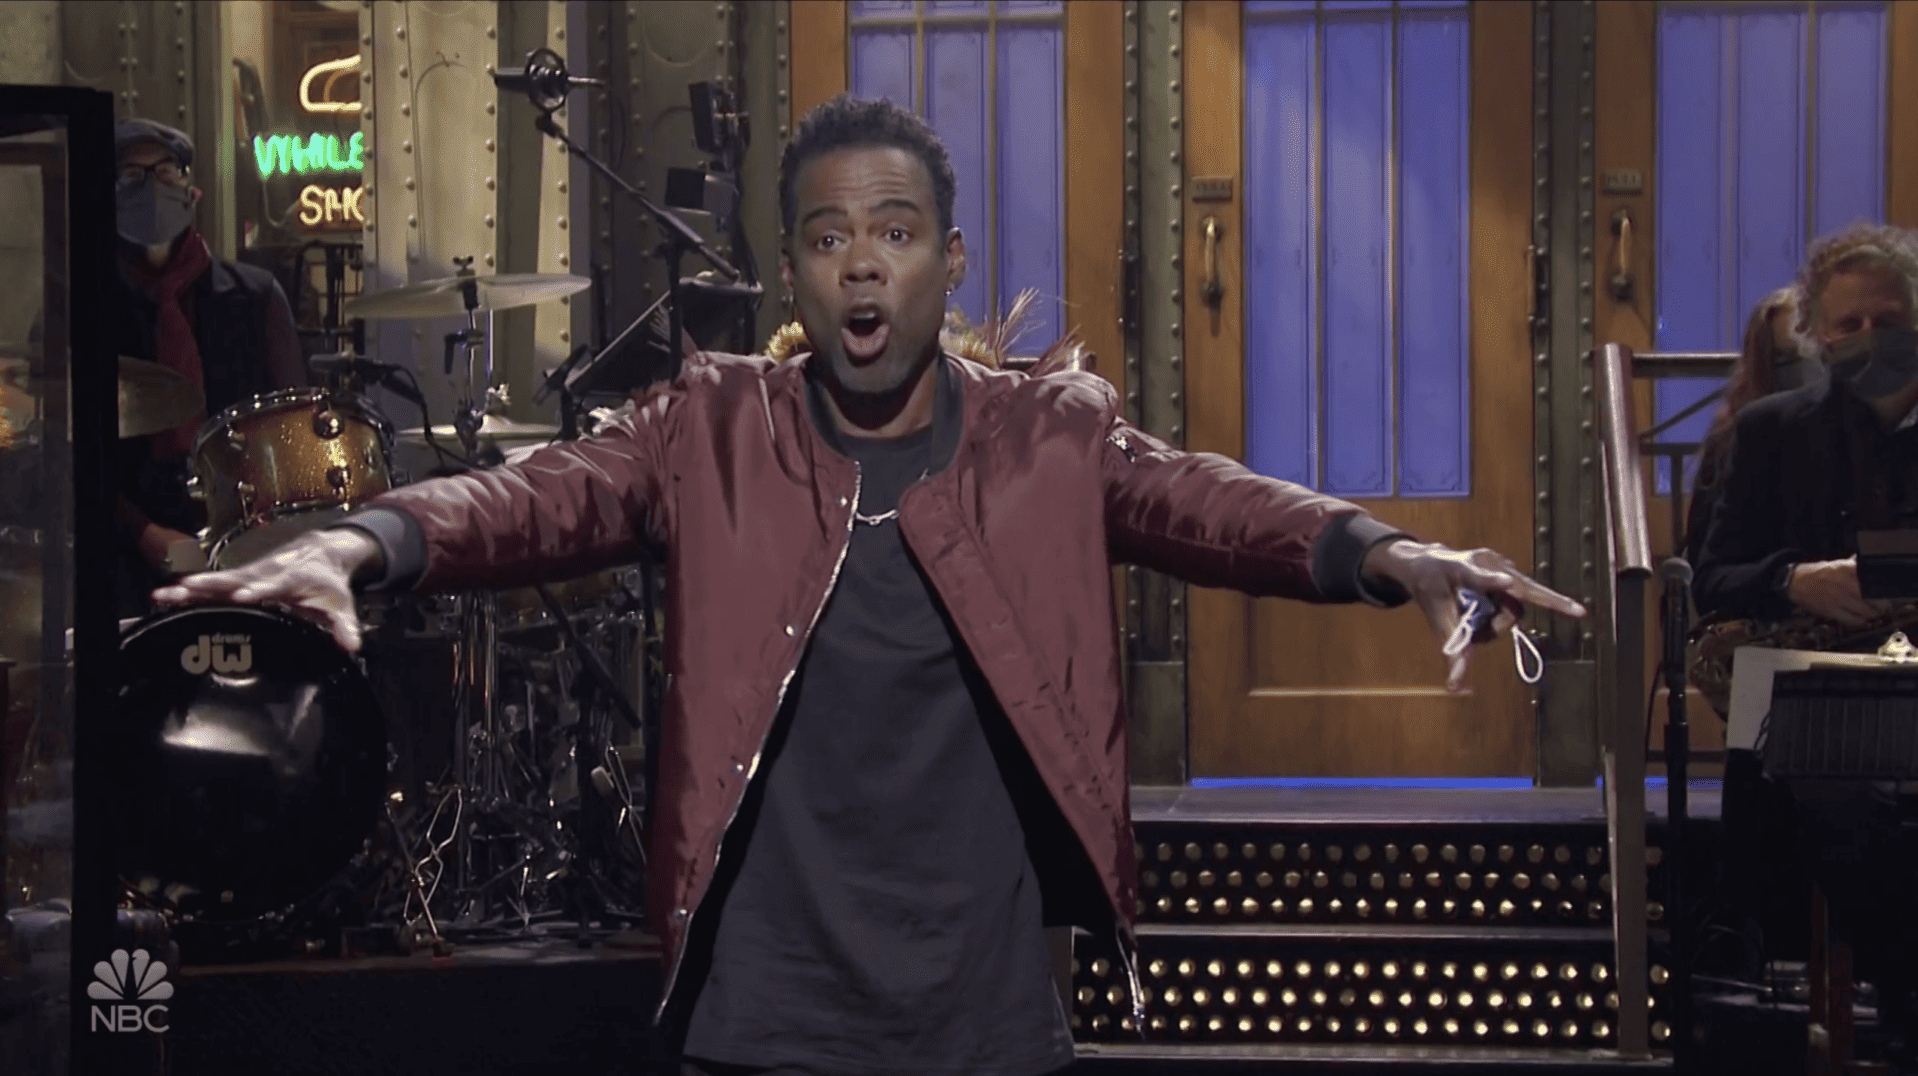 Chris Rock as a cast member of Saturday Night Live